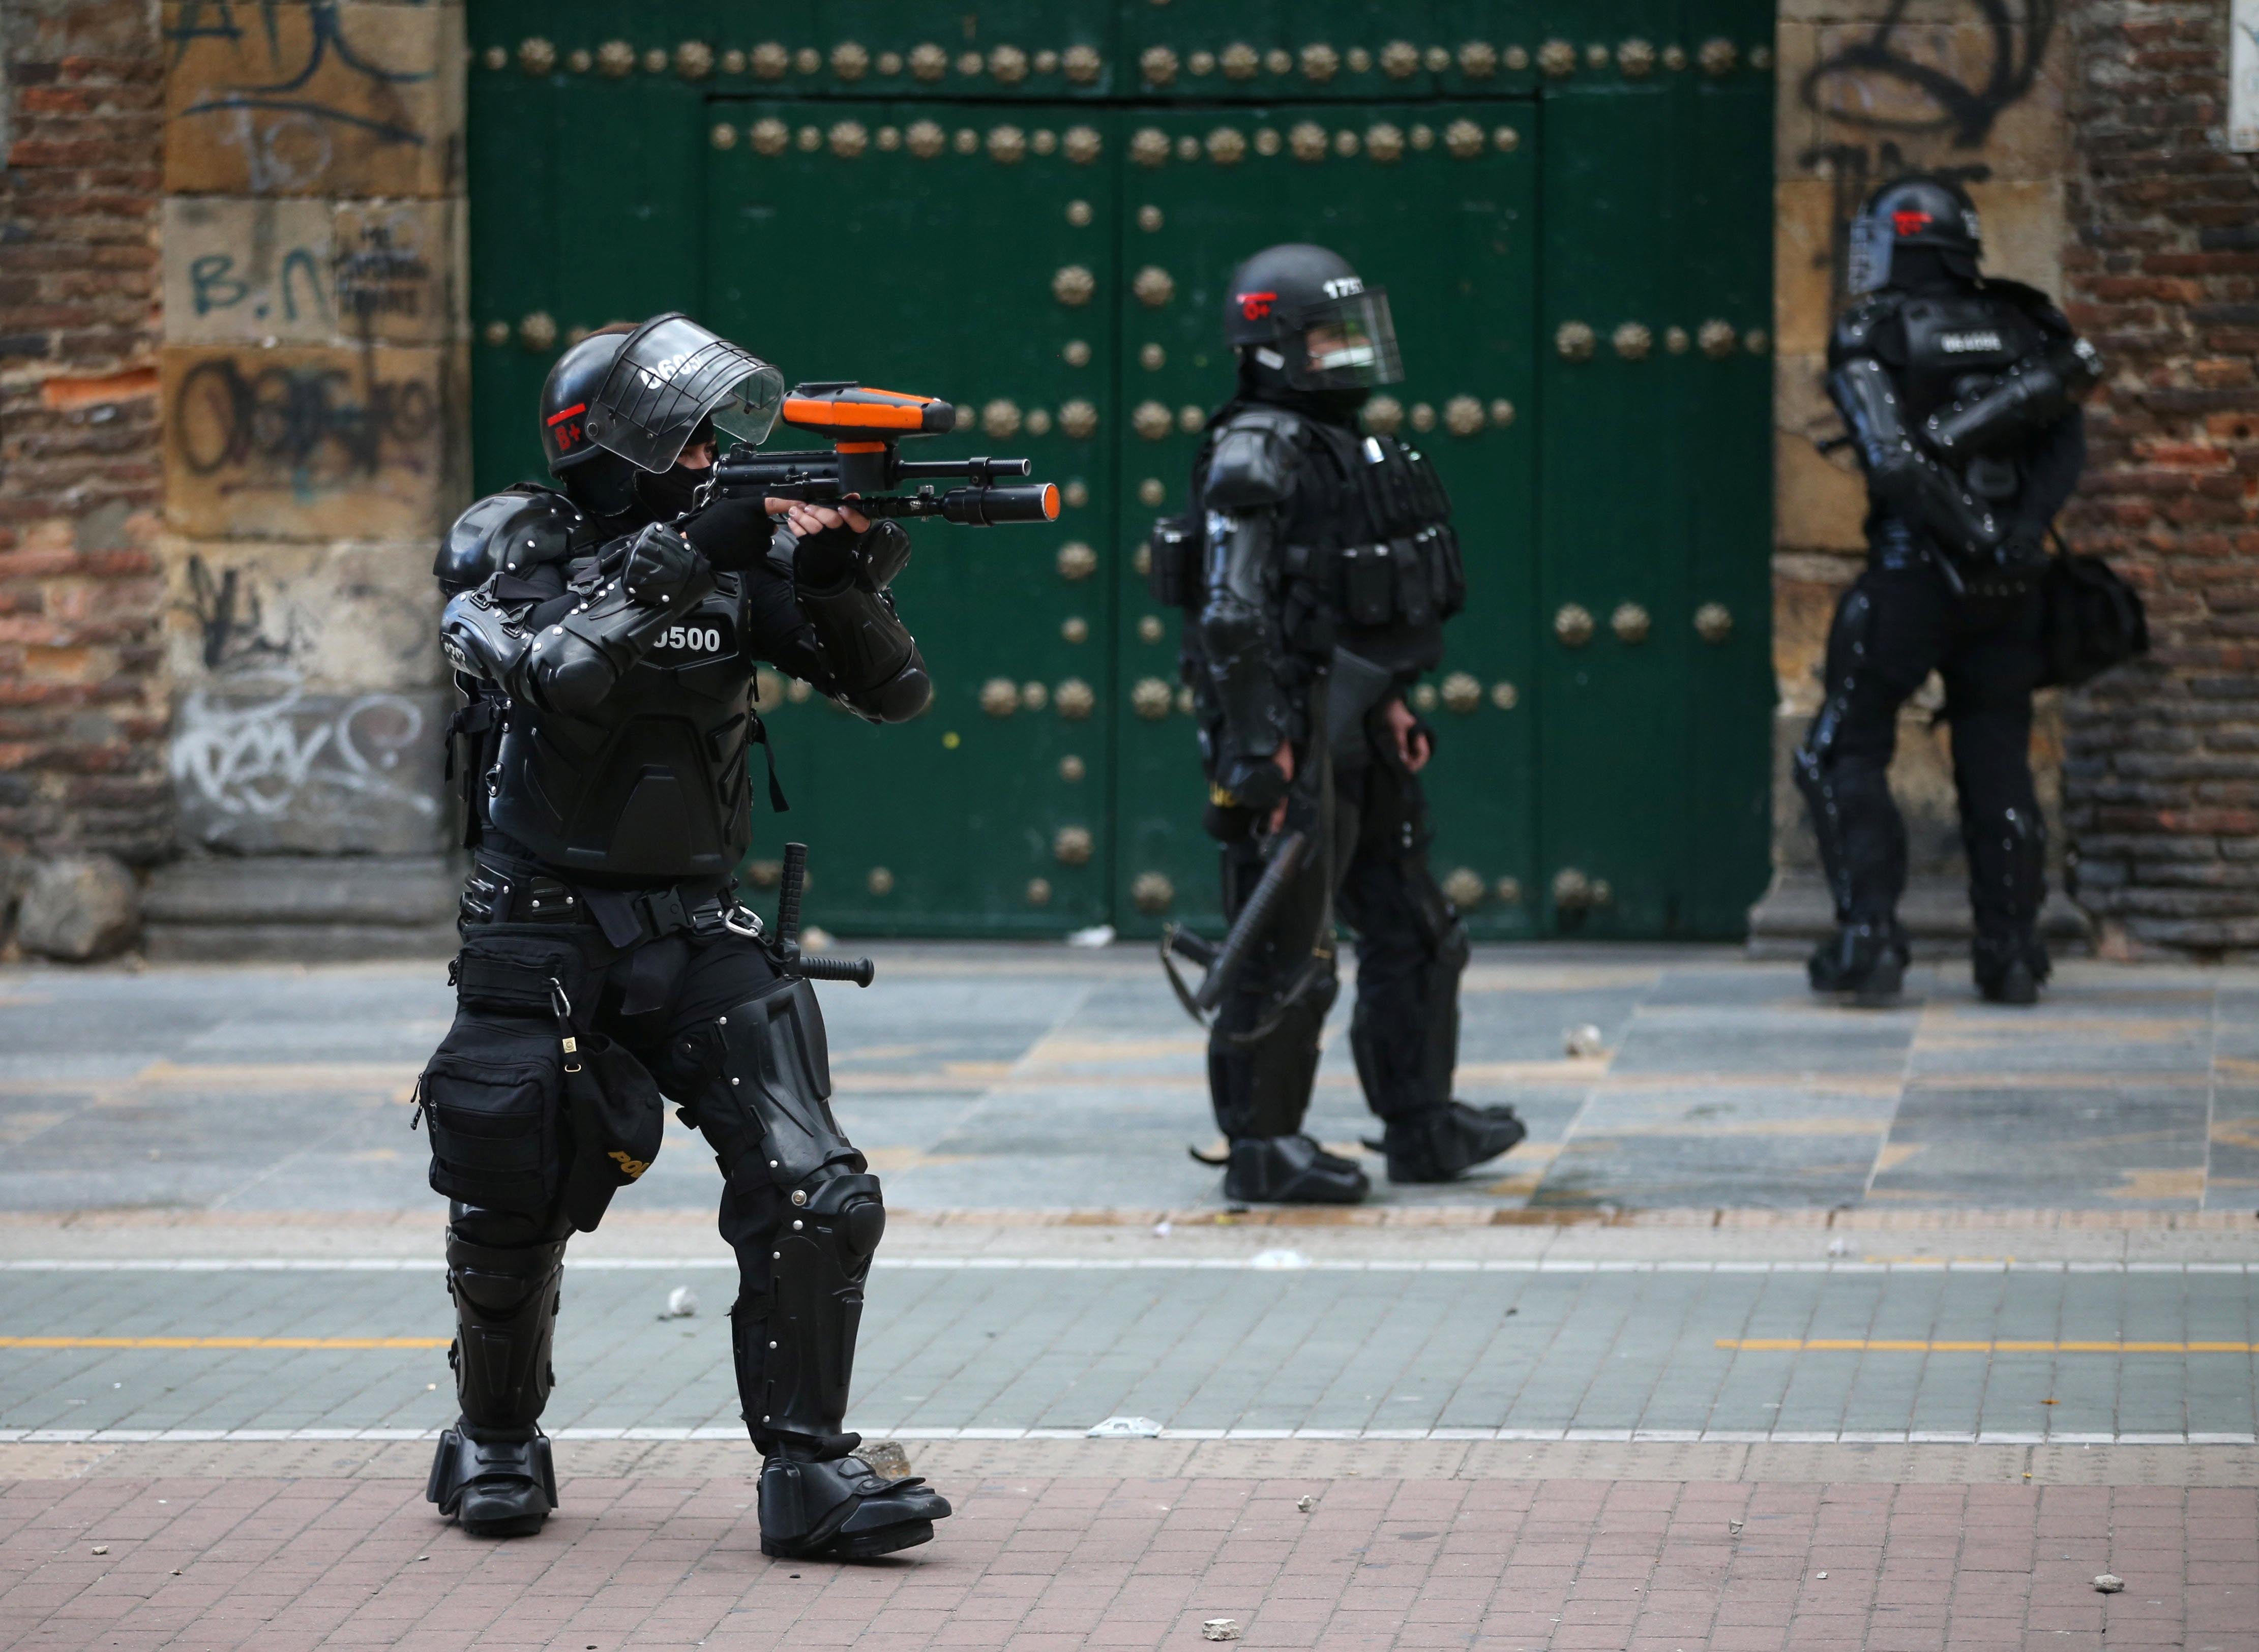 A member of the security forces aims during a demonstration against police brutality in Bogotá, Colombia, on September 13, 2020.